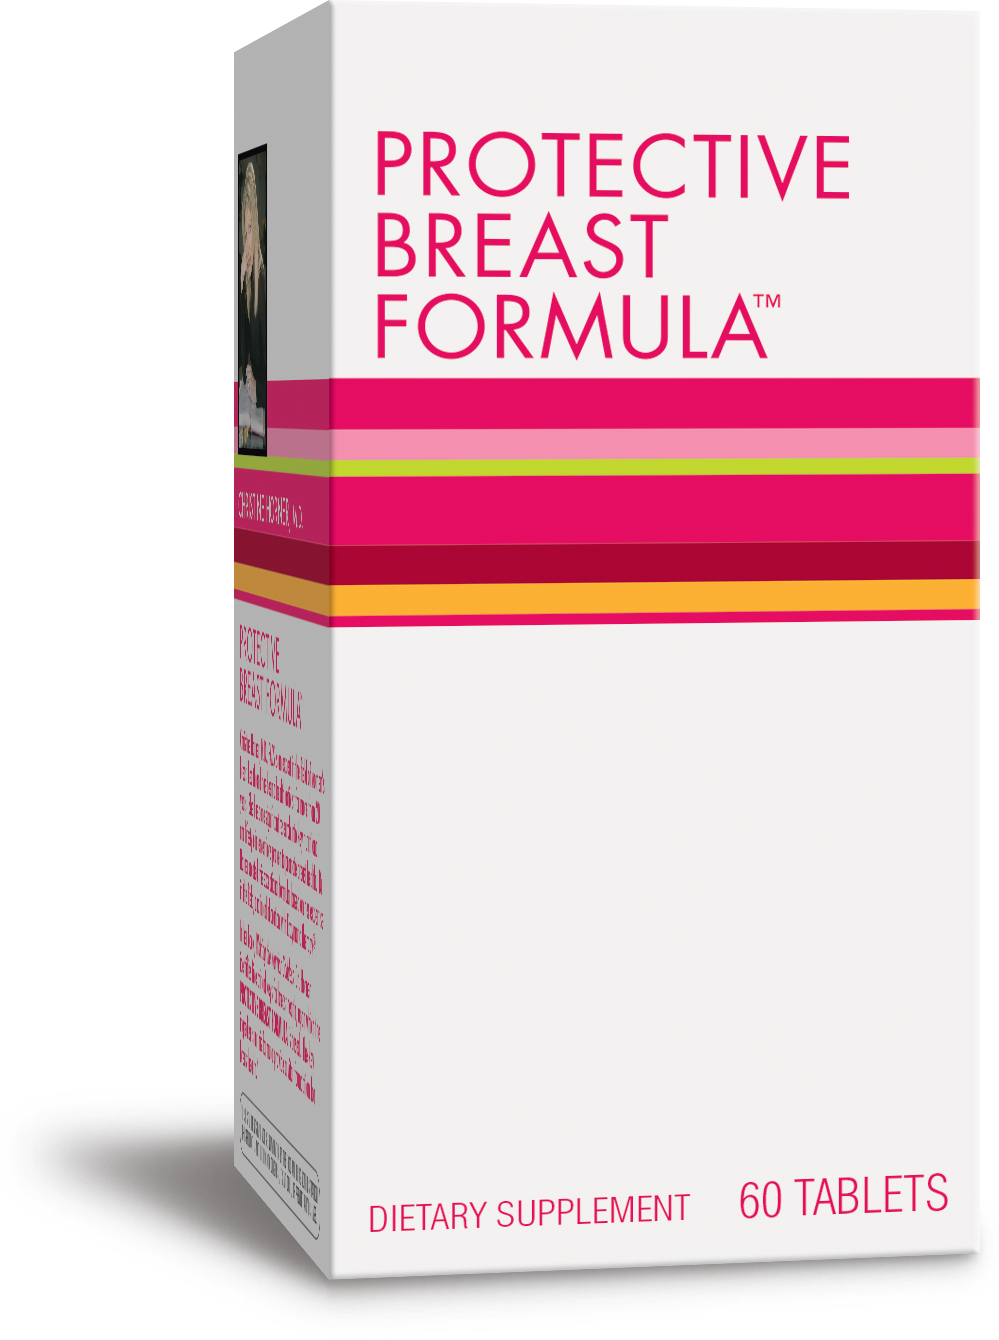 A package of Nature's Way Protective Breast Formula™